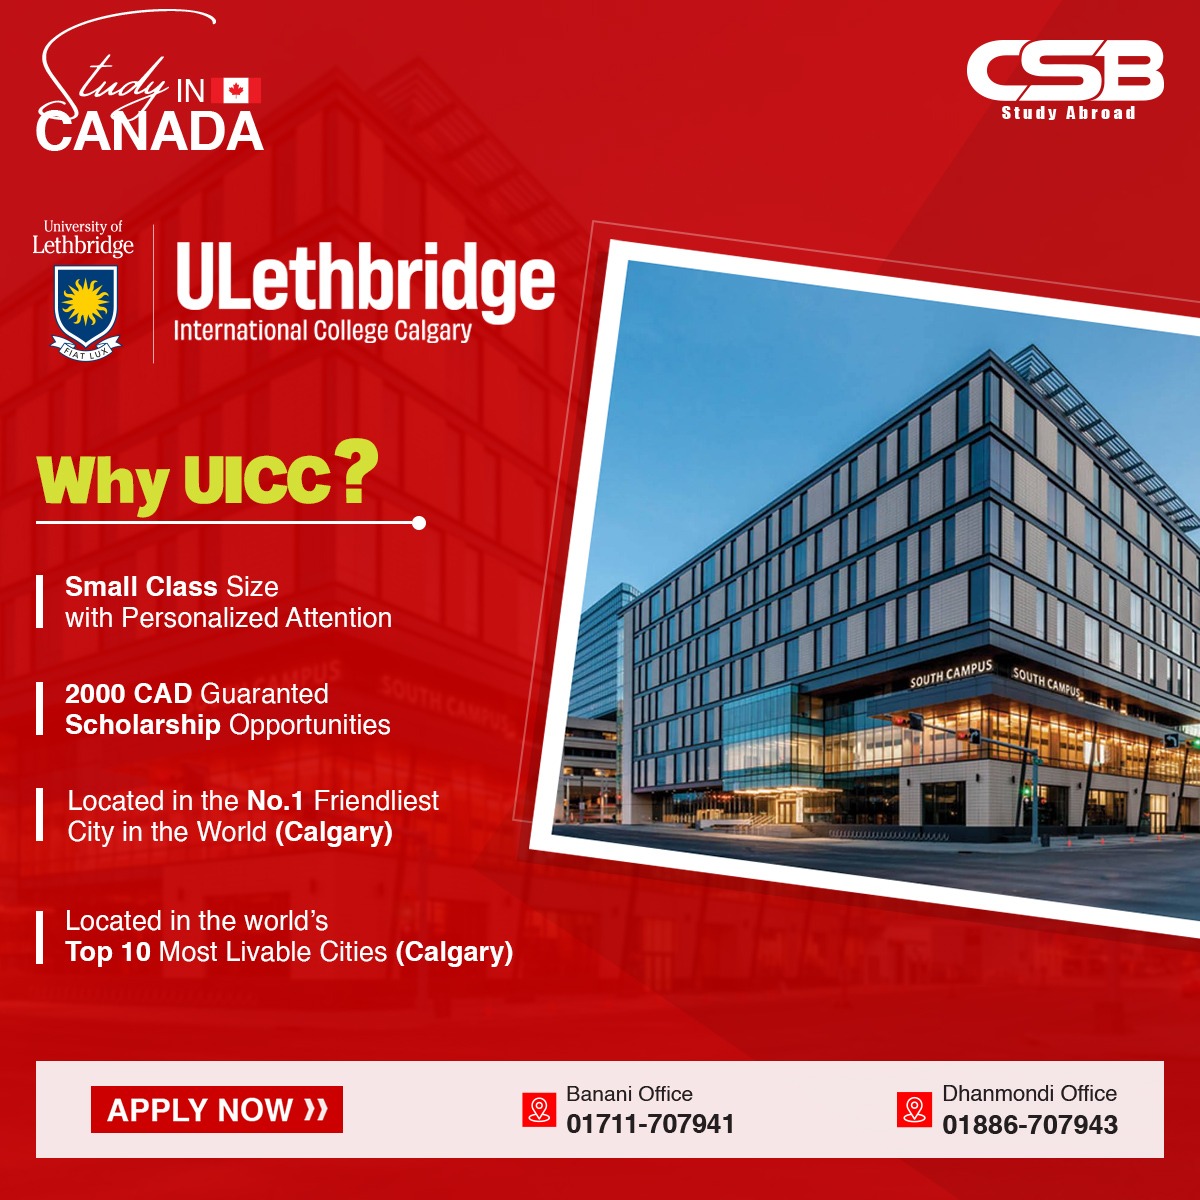 Unleash Your Potential in Canada with ULethbridge International College! 
🇧🇩➟🇨🇦
UICC is offering a pathway to success with guaranteed scholarships of $2,000 CAD! 

👉 Ready to take the first step? Apply with CSB Study Abroad today! tinyurl.com/csbbdform

#studyincanada